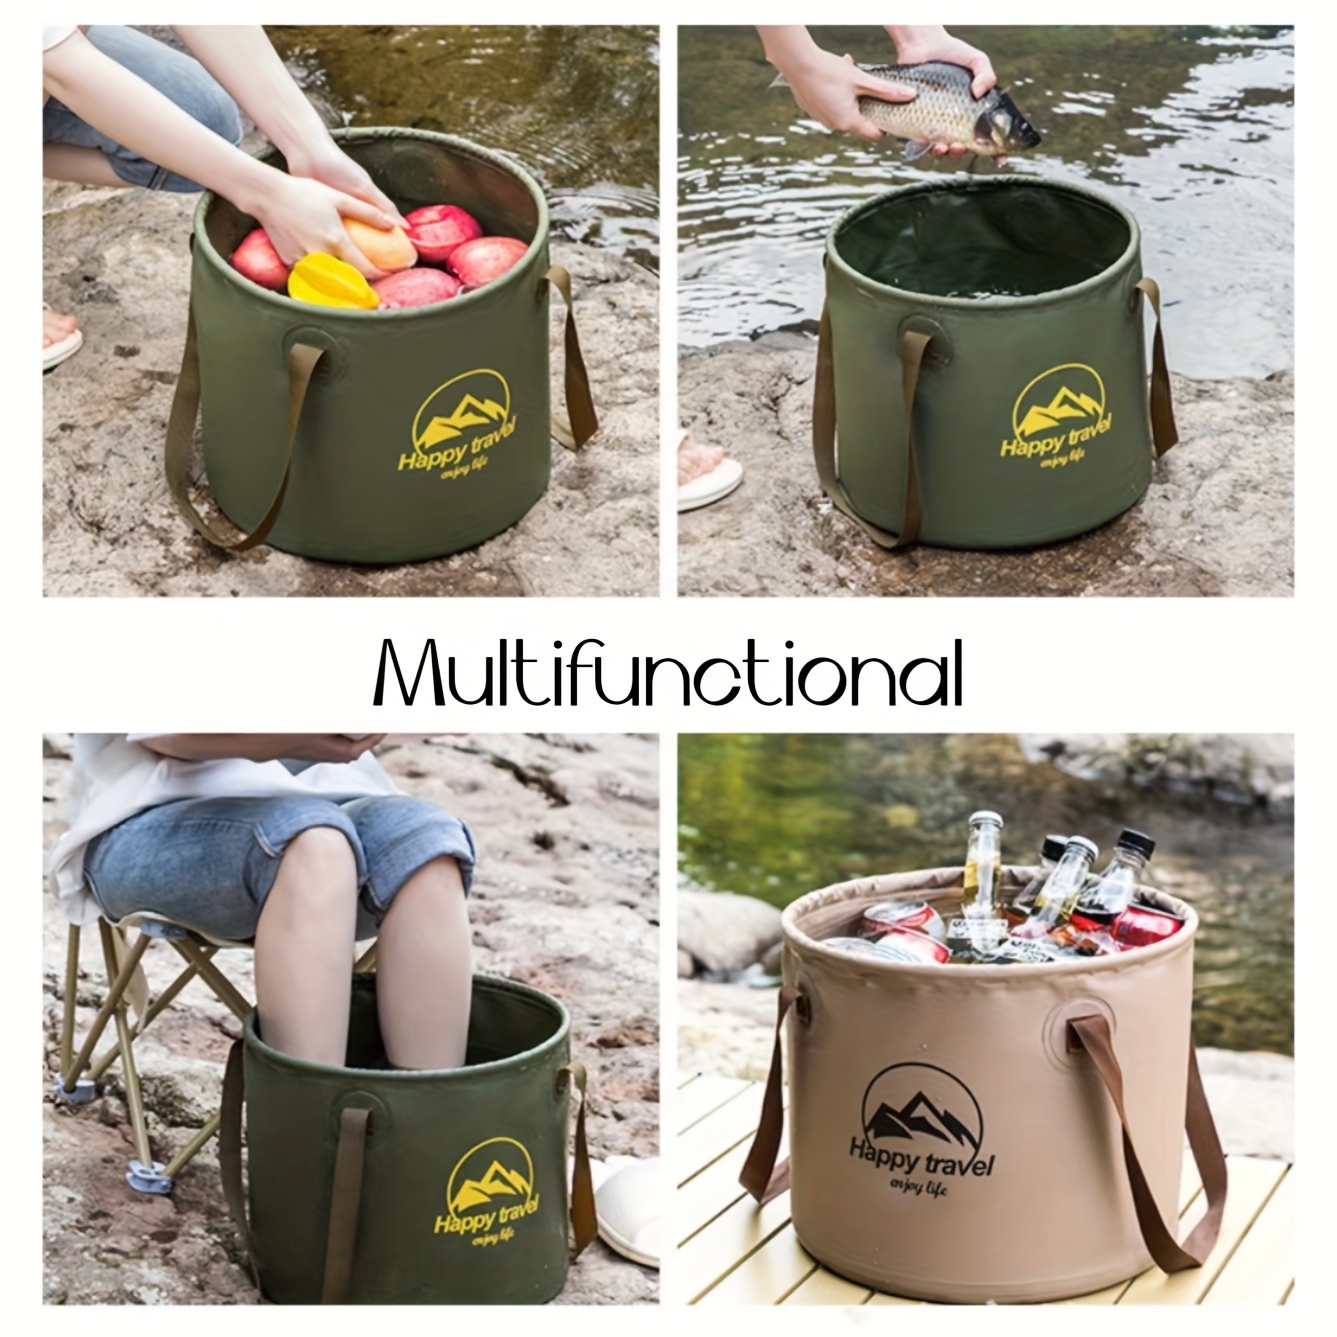 AUTODECO Collapsible Bucket 5 Gallon Container Folding Water Bucket  Portable Wash Basin for Camping Fishing Travelling Outdoor G